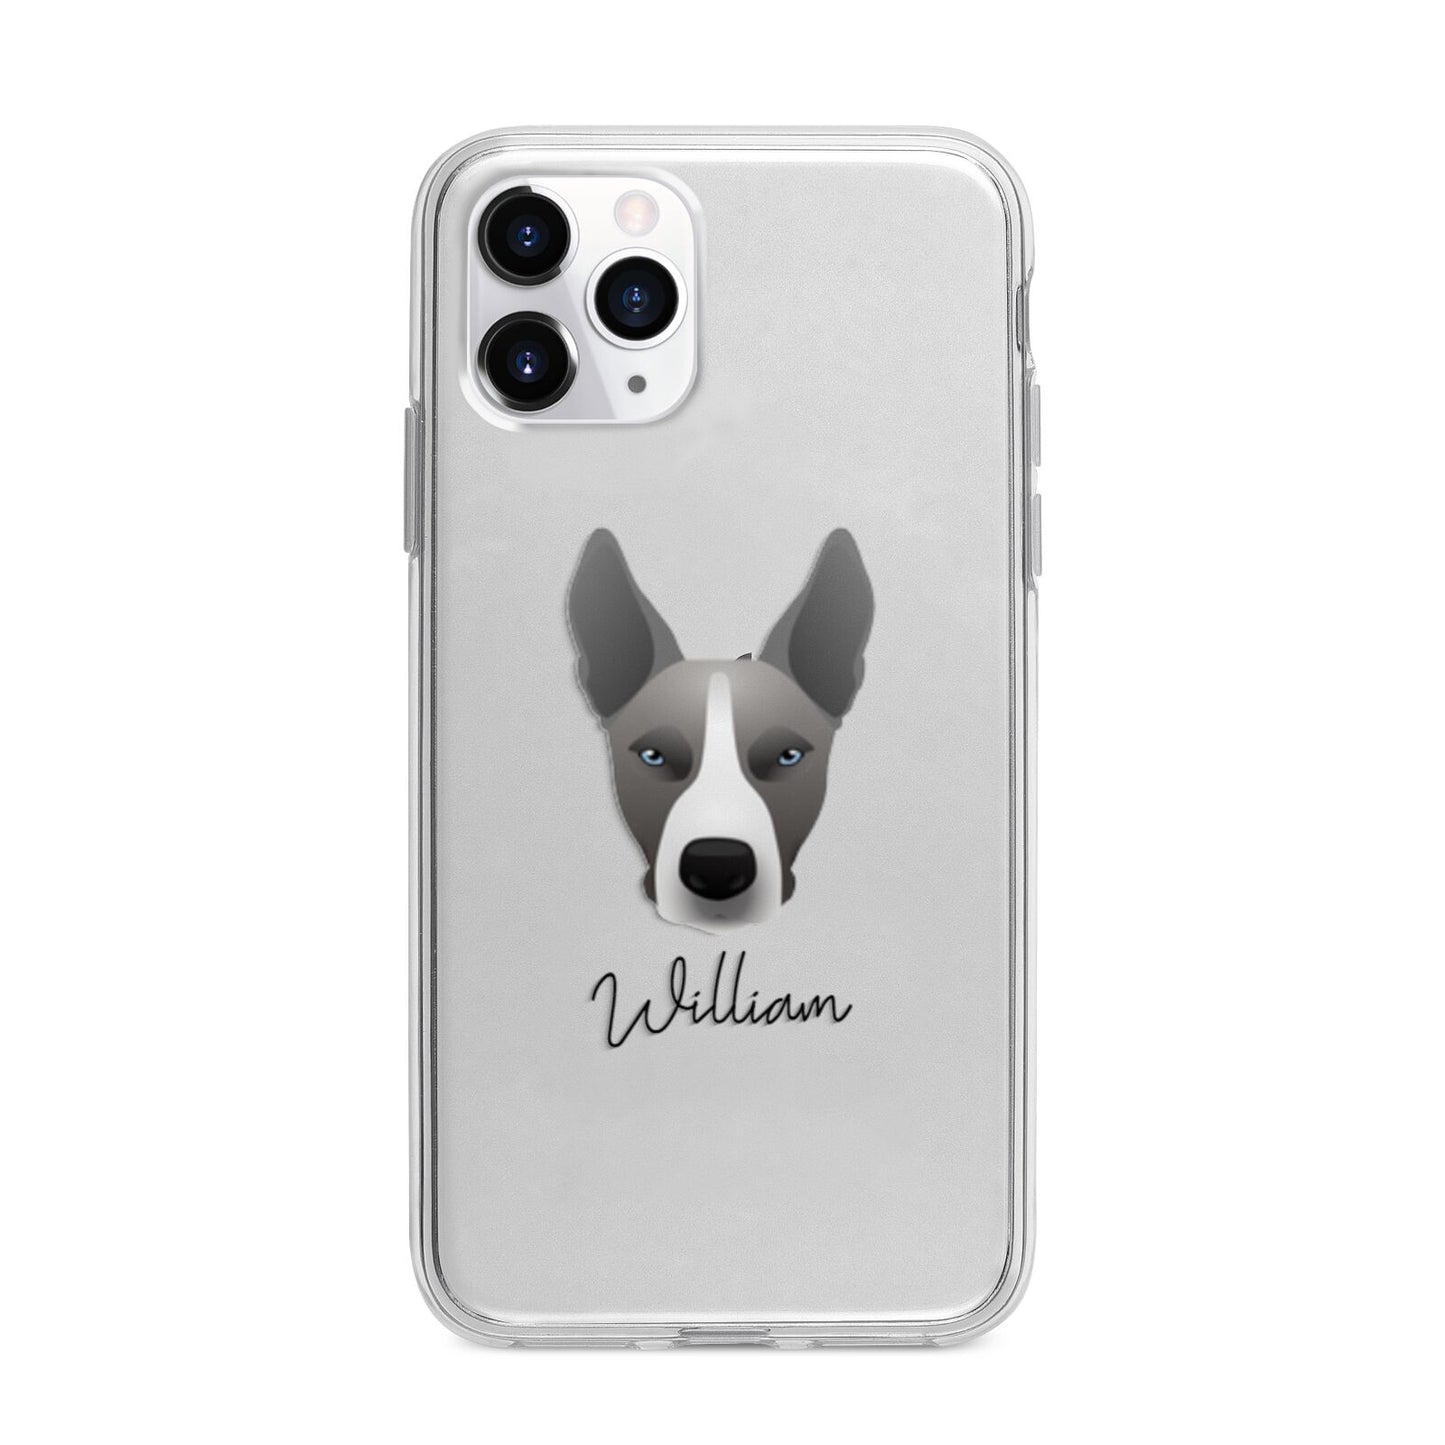 Pitsky Personalised Apple iPhone 11 Pro Max in Silver with Bumper Case